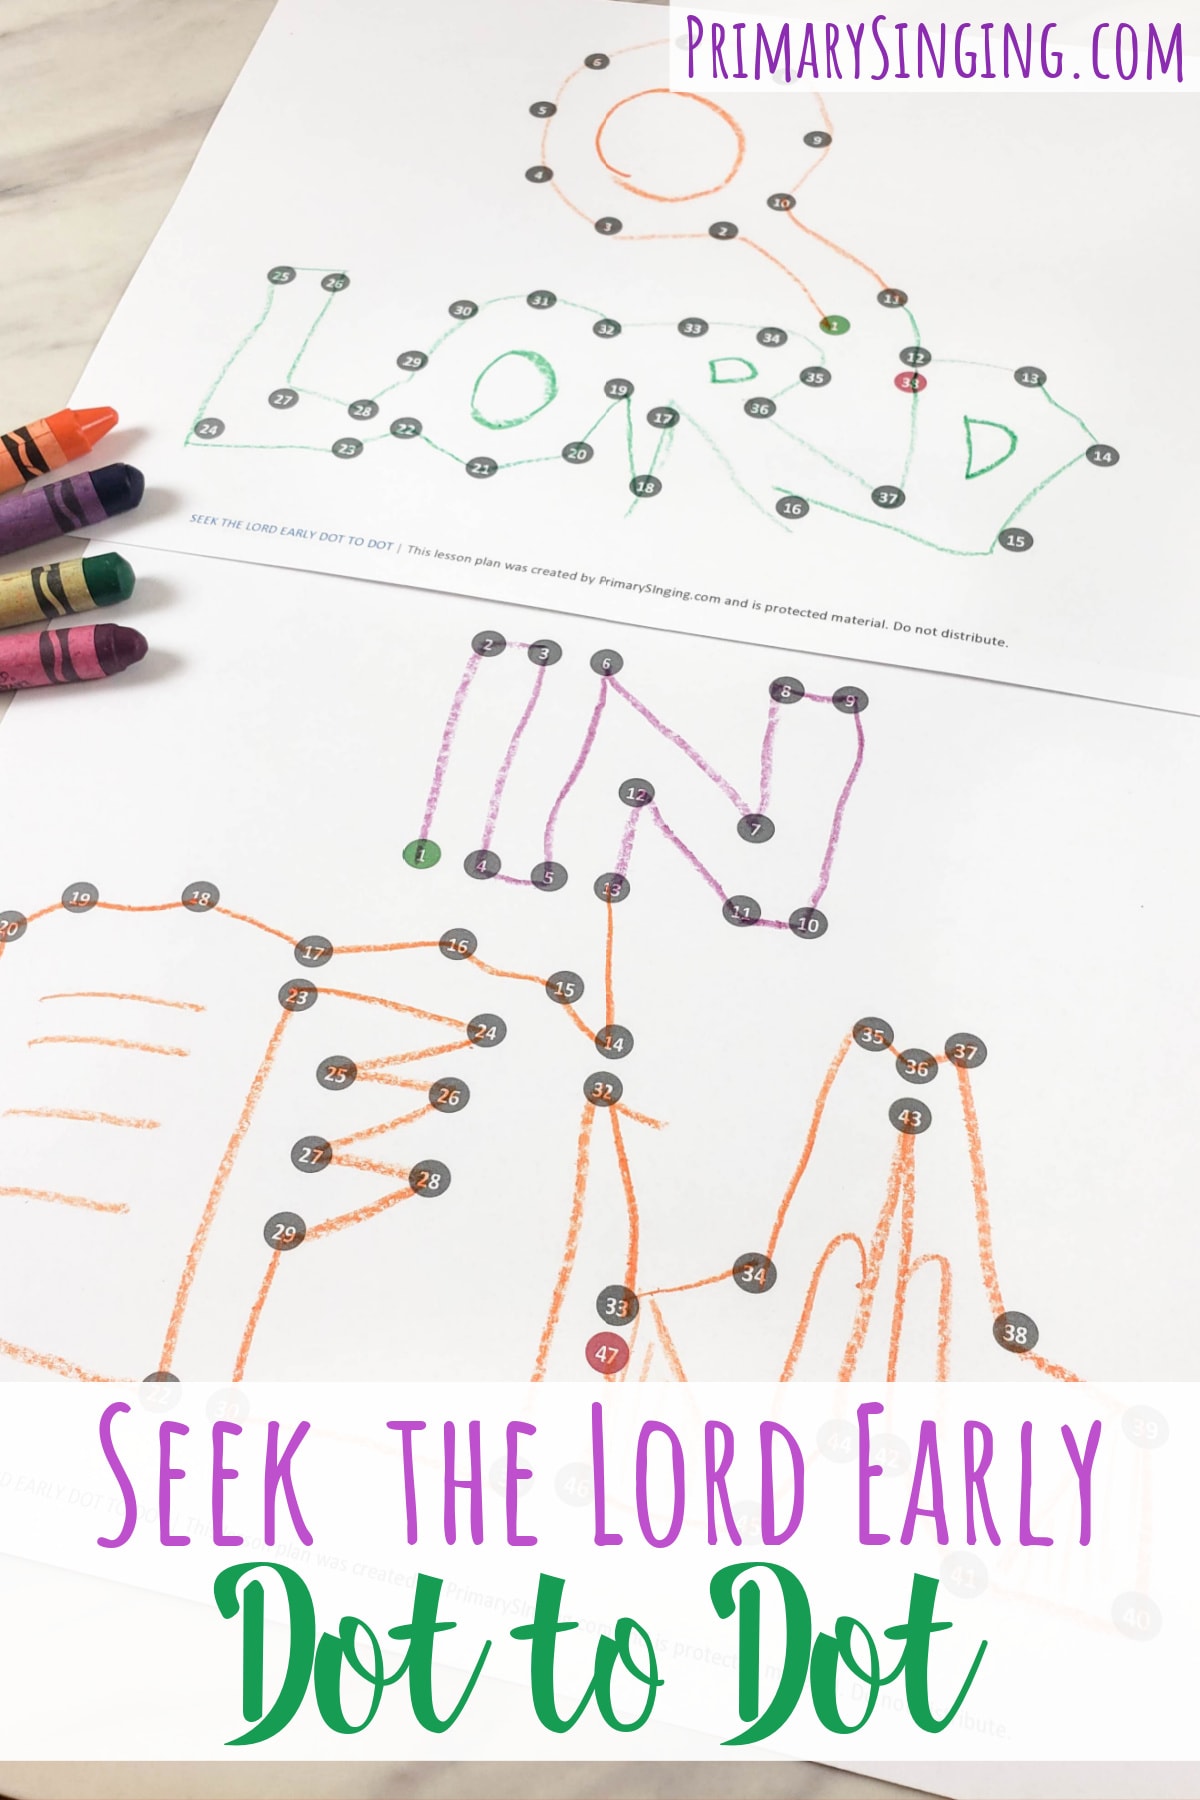 Seek the Lord Early Dot to Dot Singing time ideas for Primary Music Leaders Seek the Lord Early Dot to Dot